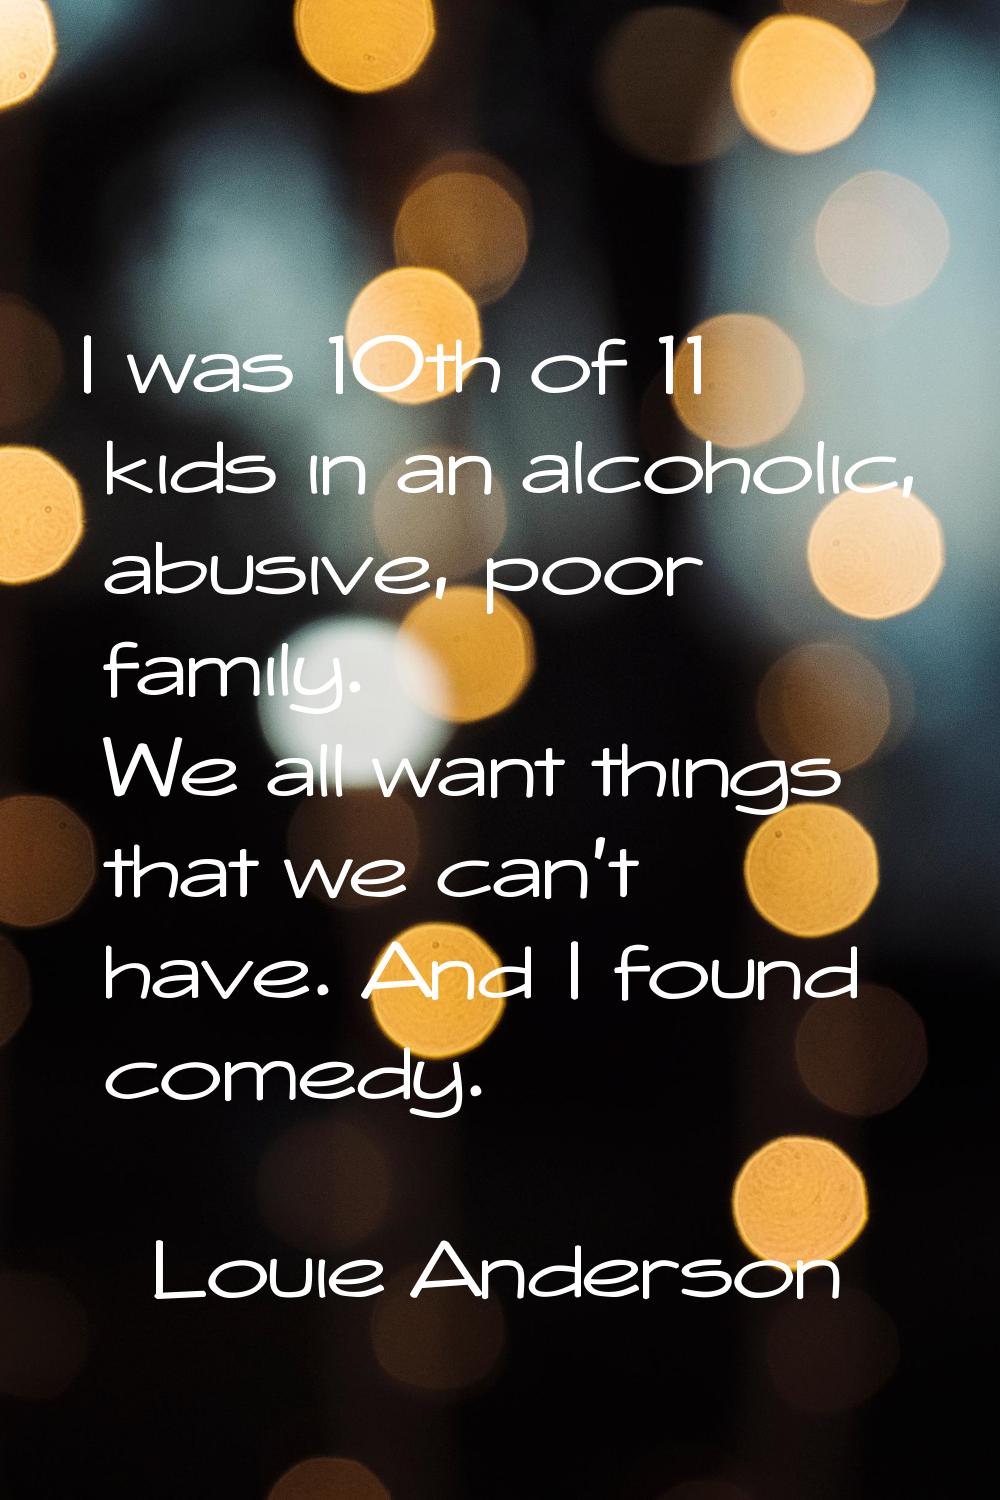 I was 10th of 11 kids in an alcoholic, abusive, poor family. We all want things that we can't have.